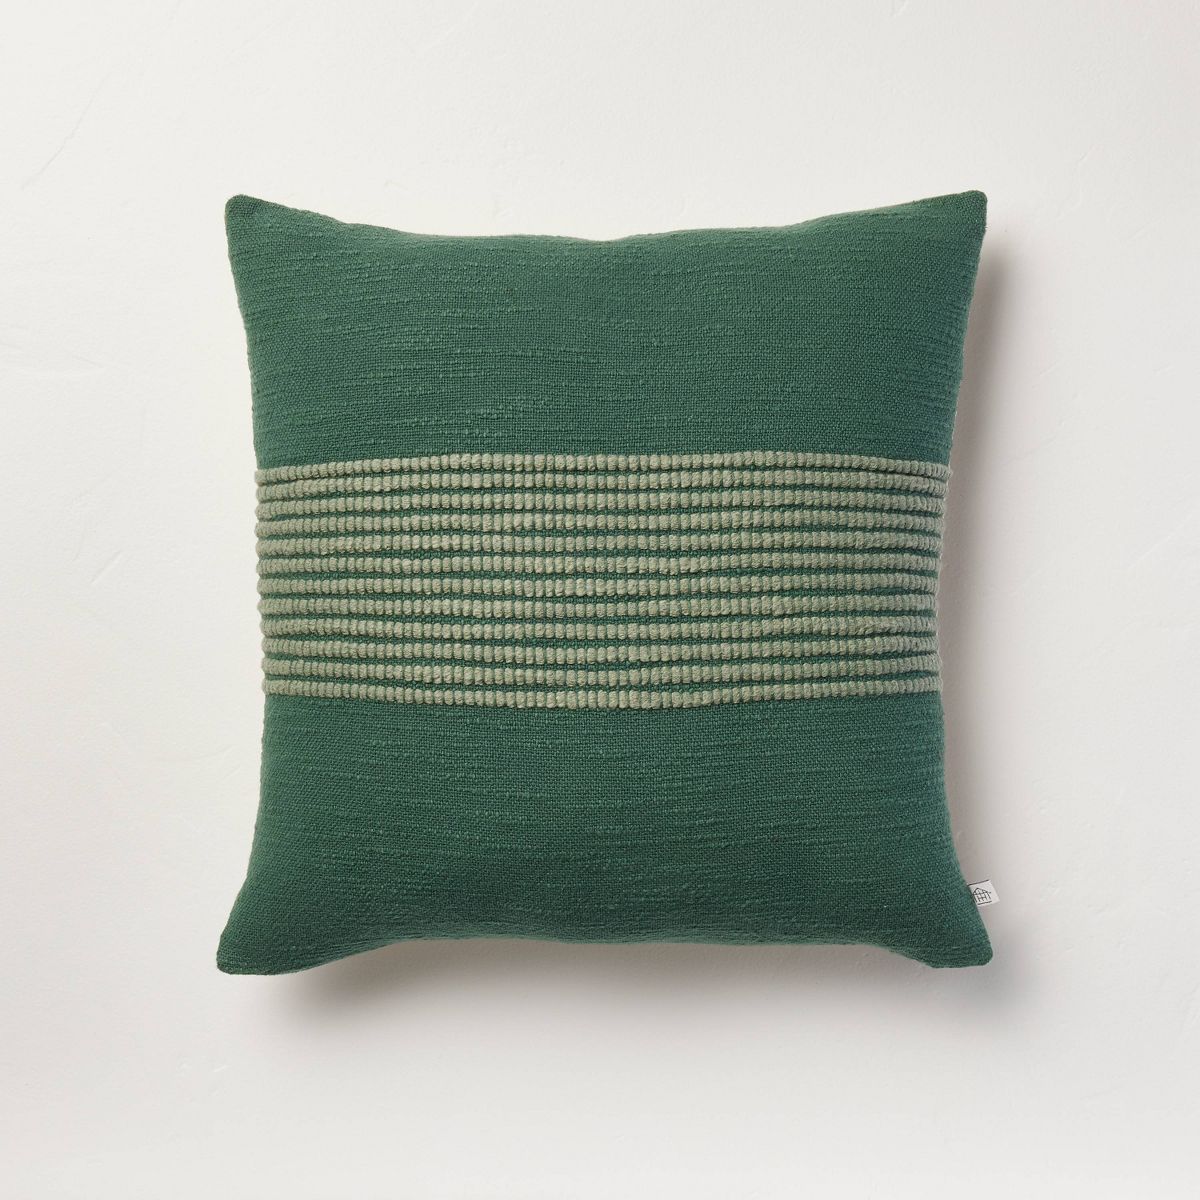 18"x18" Textured Center Stripes Square Throw Pillow Green - Hearth & Hand™ with Magnolia | Target